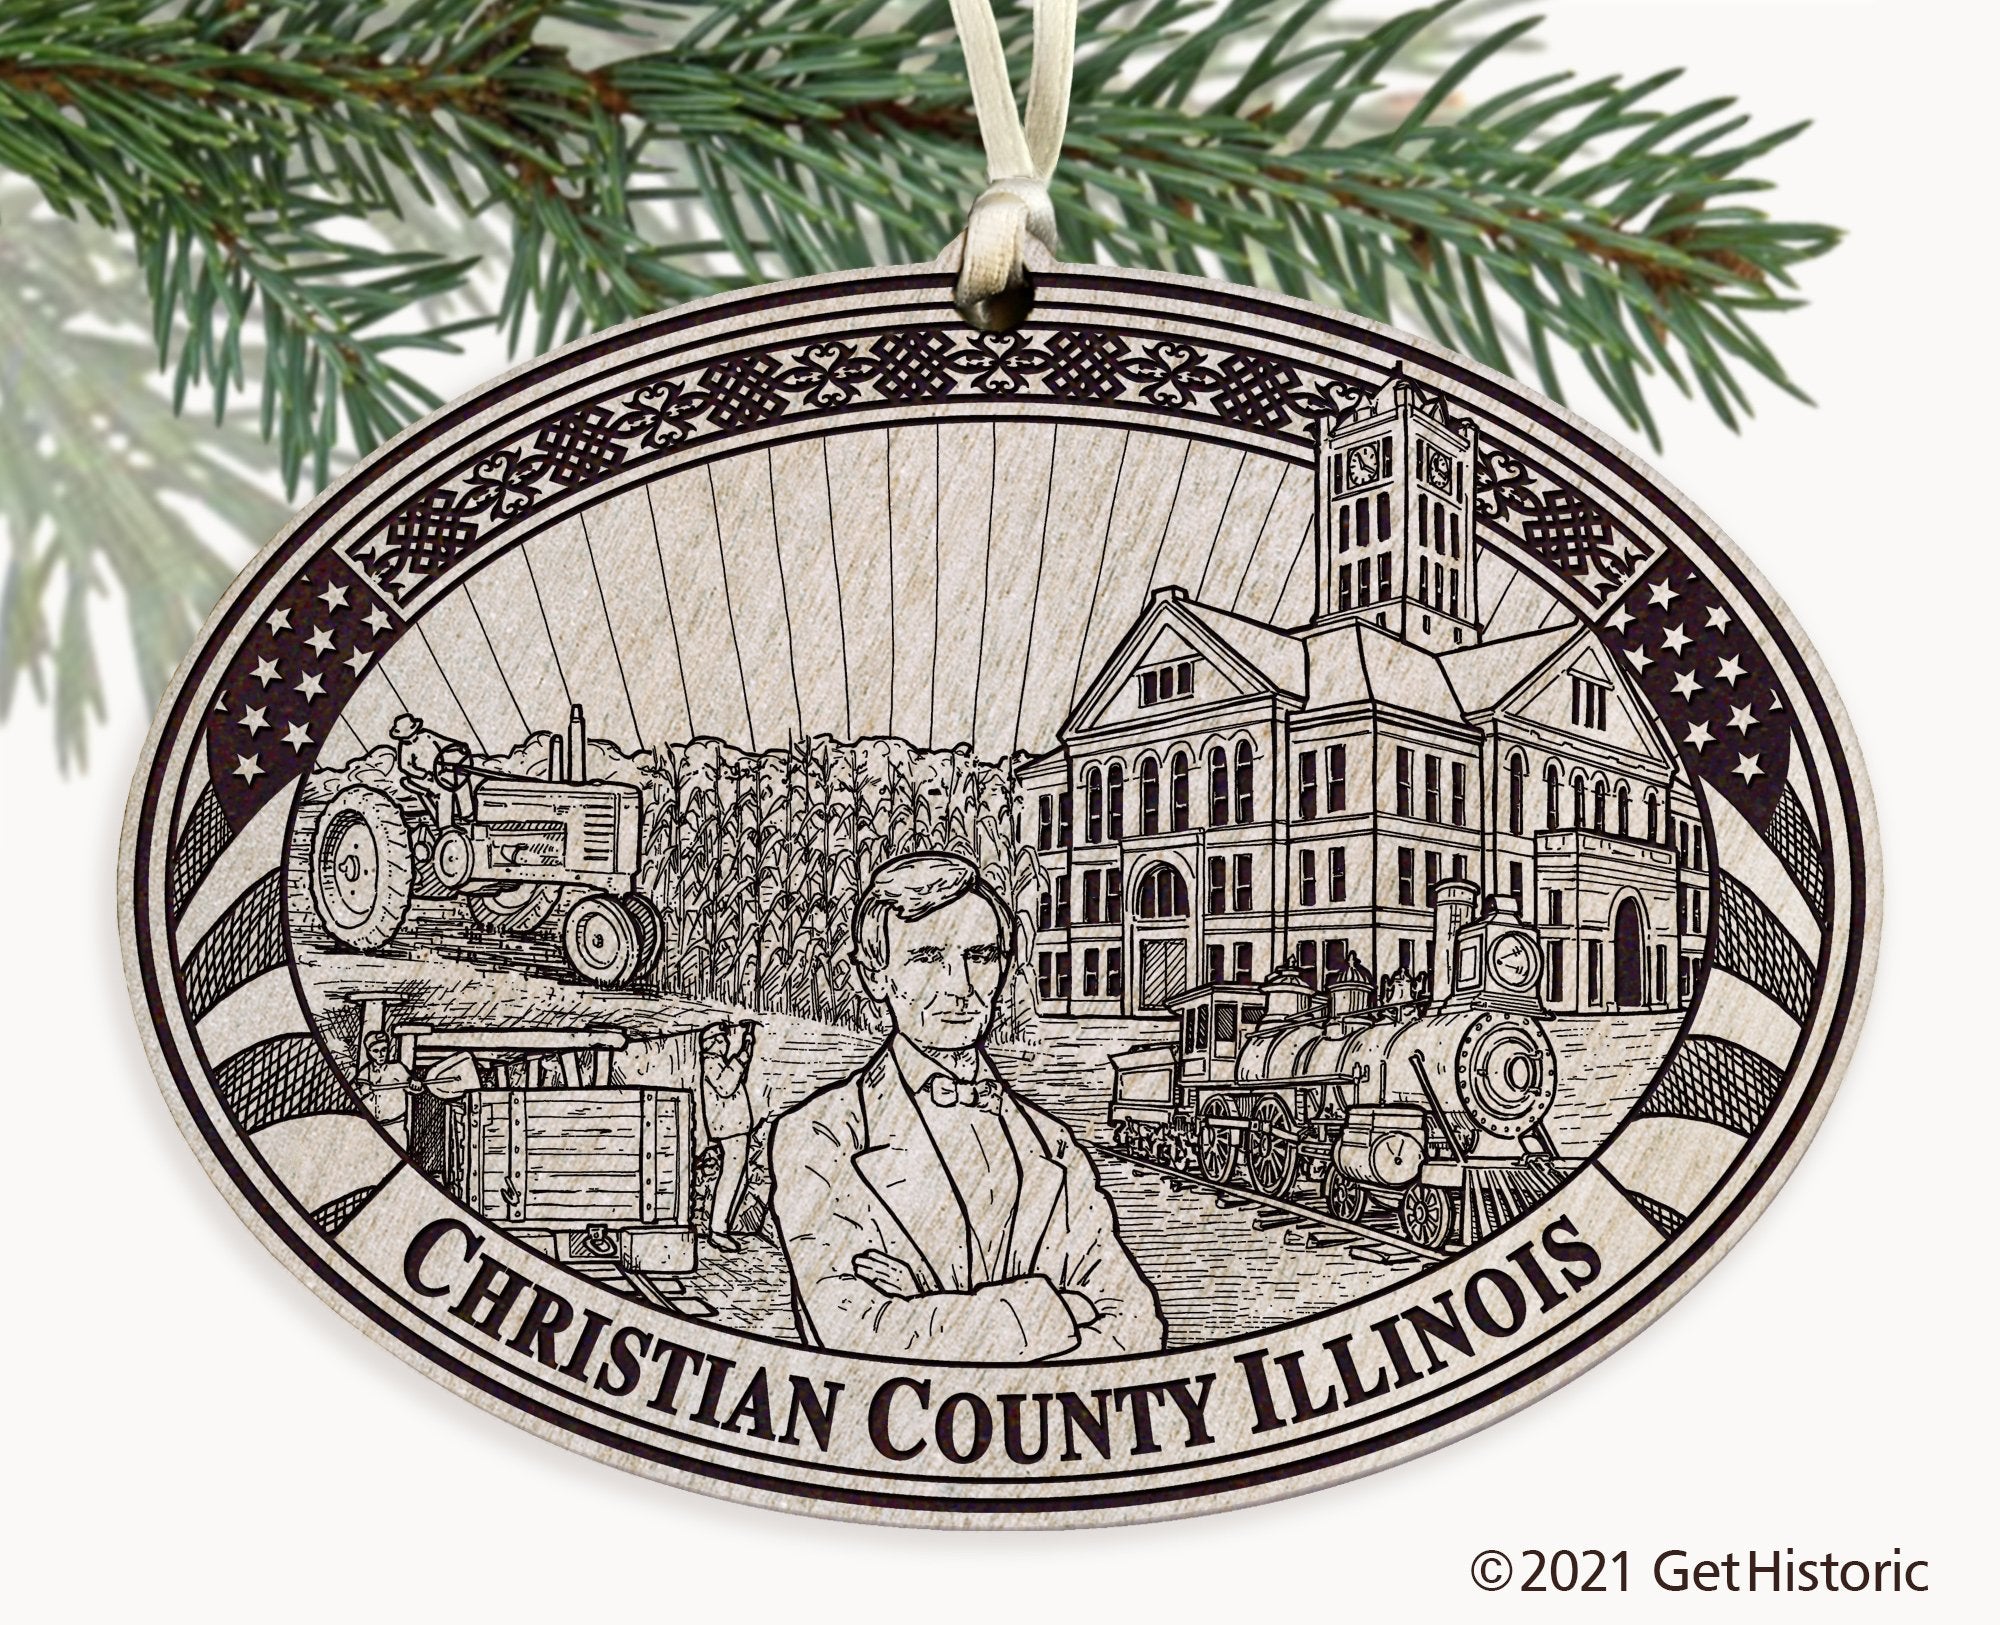 Christian County Illinois Engraved Ornament